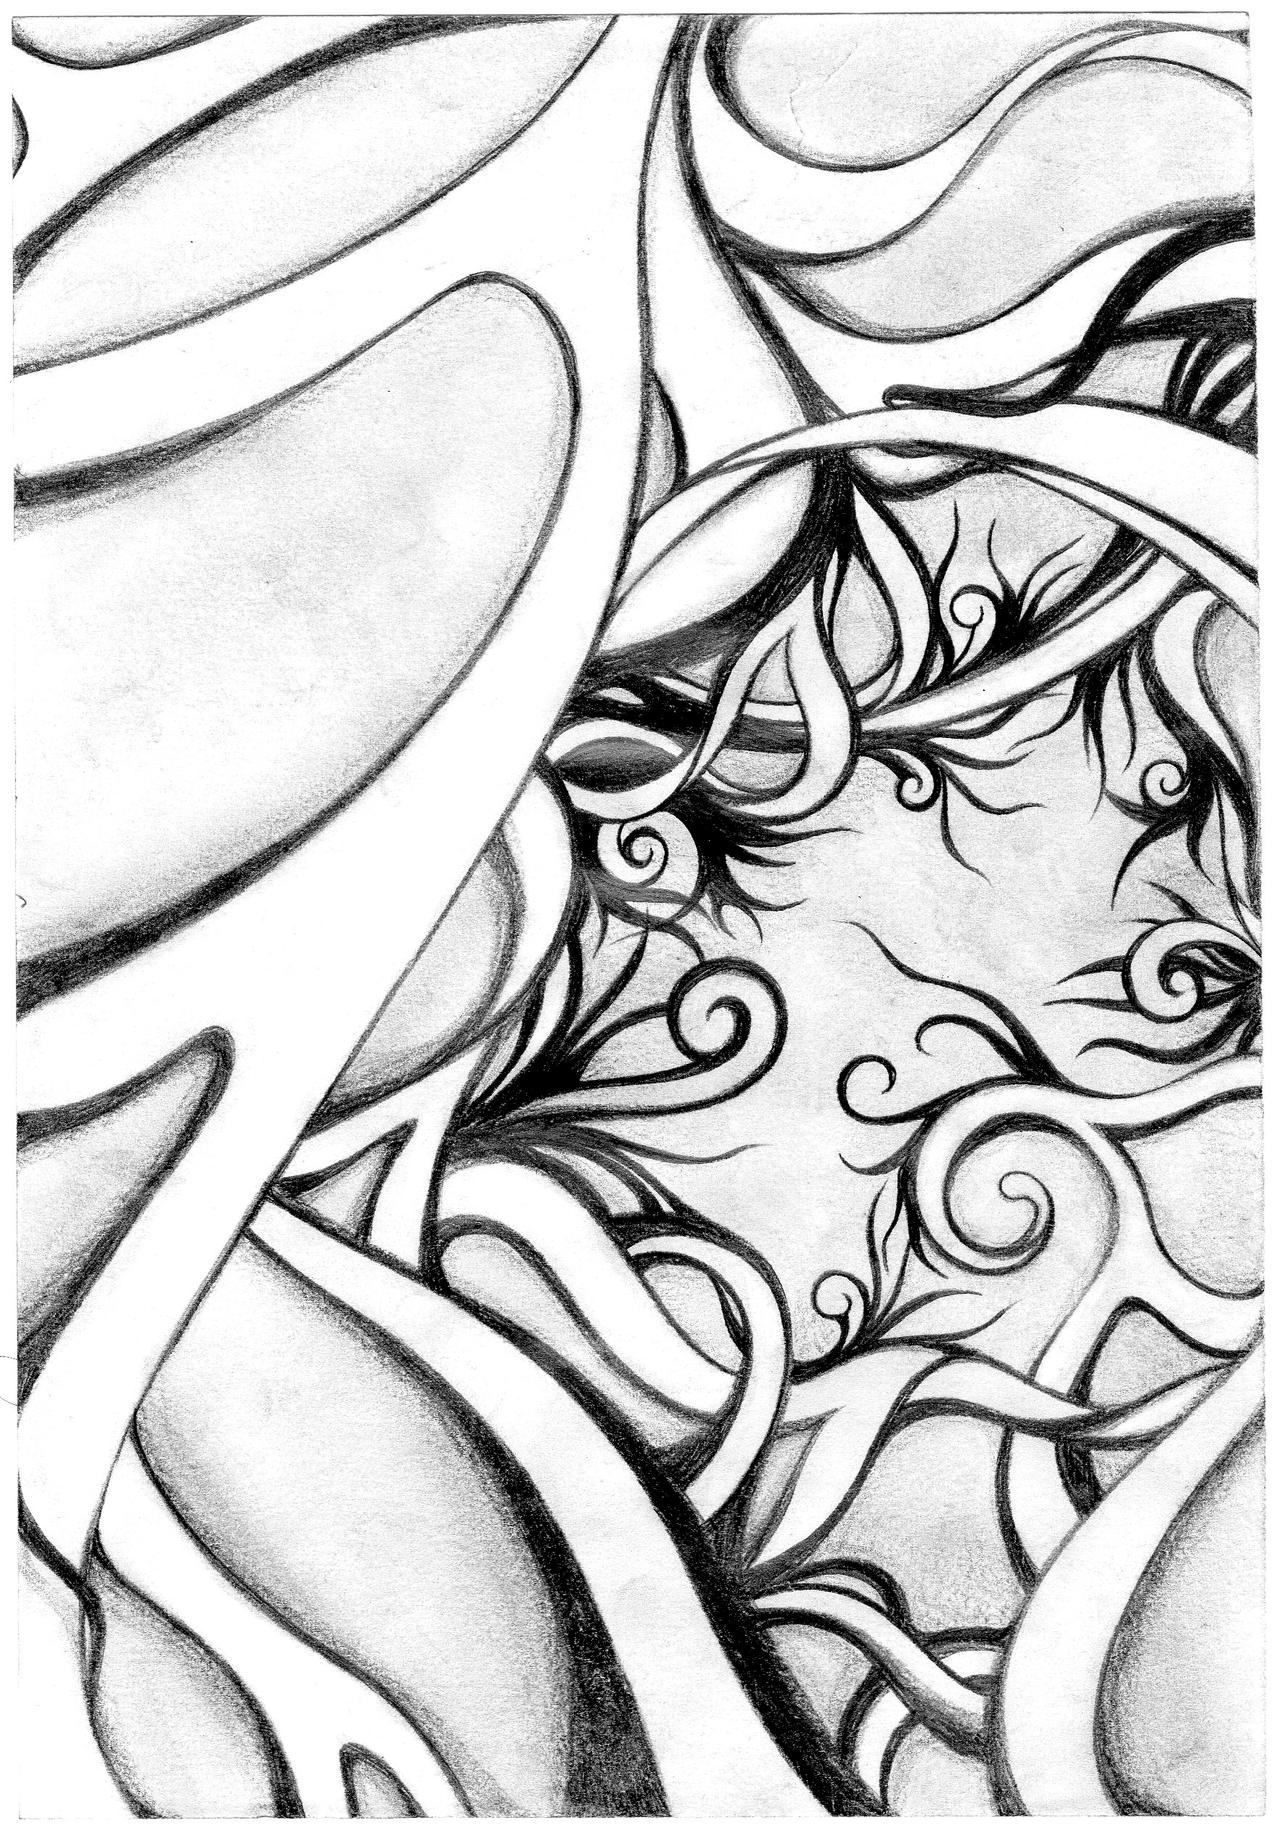 Abstract pencil drawing 1 by AdrianForoughi on DeviantArt